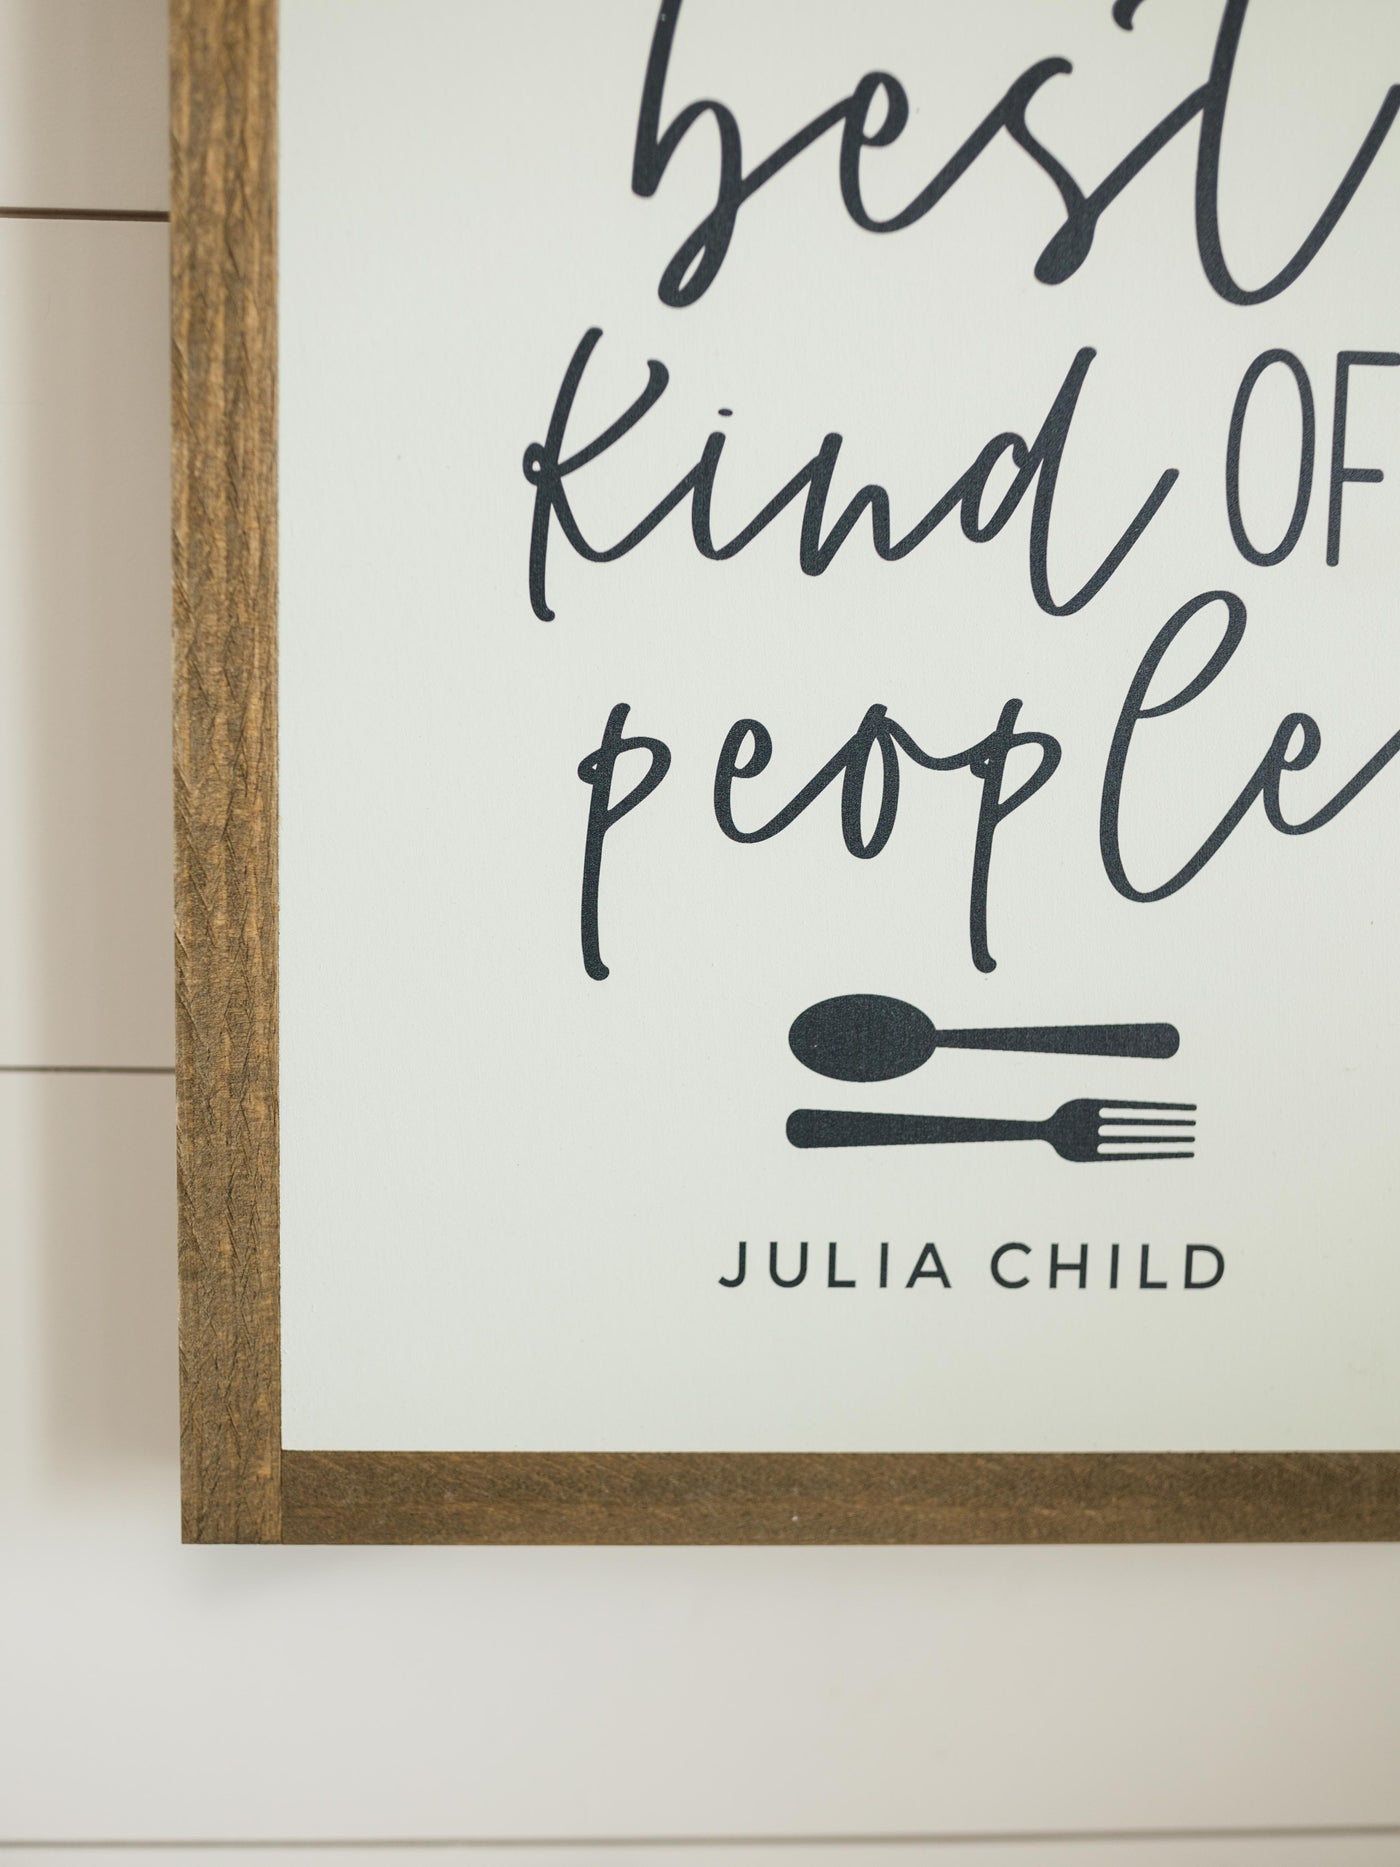 People Who Love to Eat - Julia Child